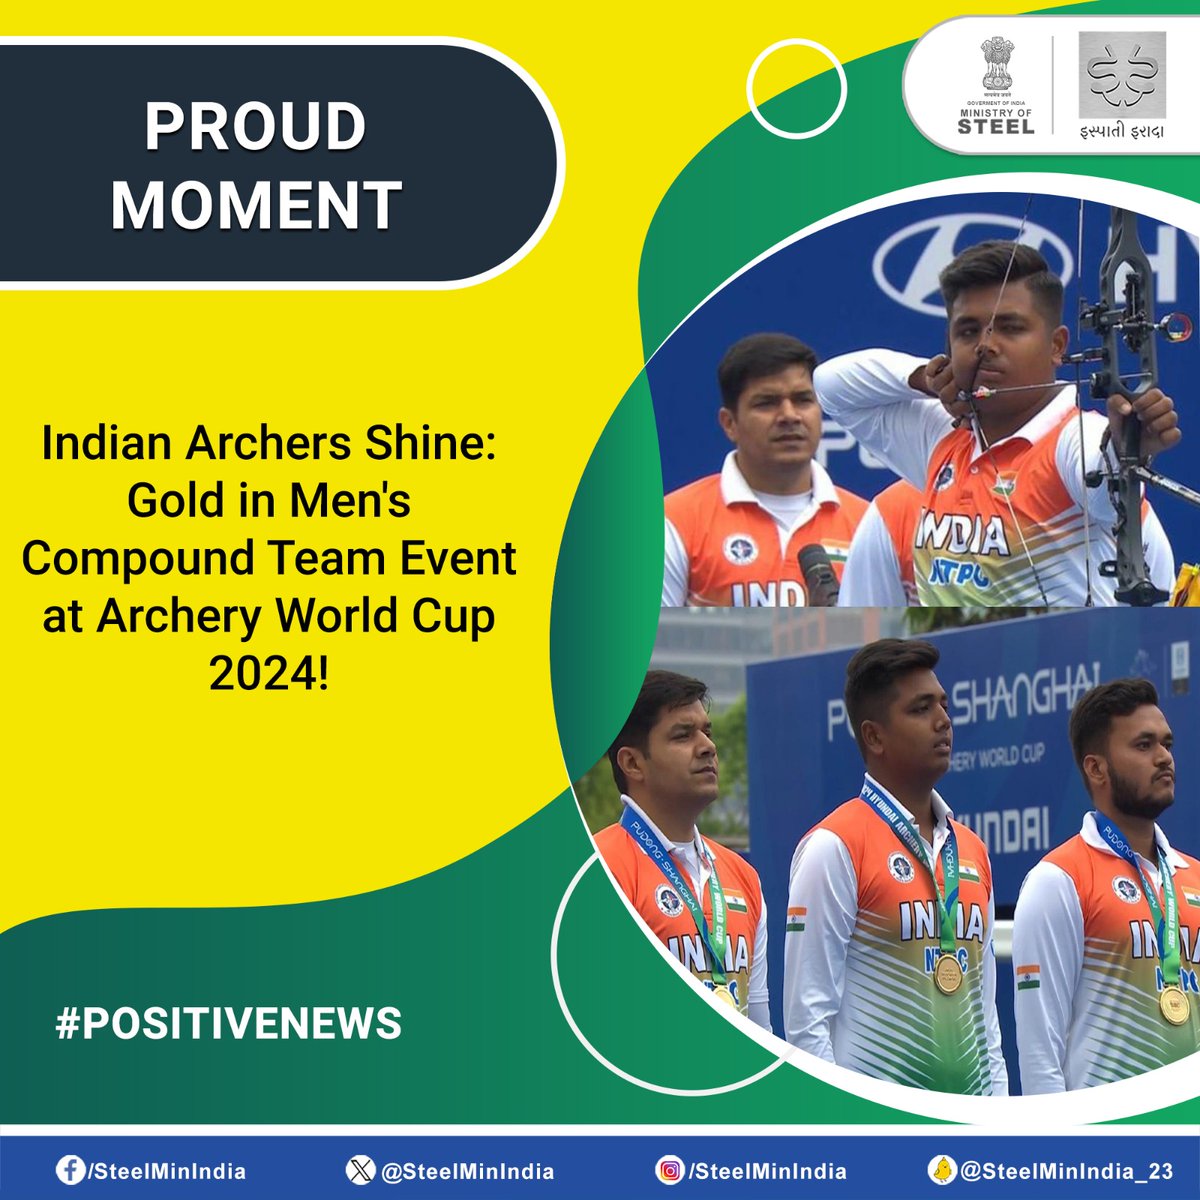 #Abhishek, #Priyansh & #Prathamesh secured #gold in Men's Compound Team Event at the #ArcheryWorldCup2024, defeating the Netherlands. Priyansh also clinched #silver in the Men's Individual Compound Event. Congratulations on this incredible win!🇮🇳🏹🥇🥈 #PositiveNews